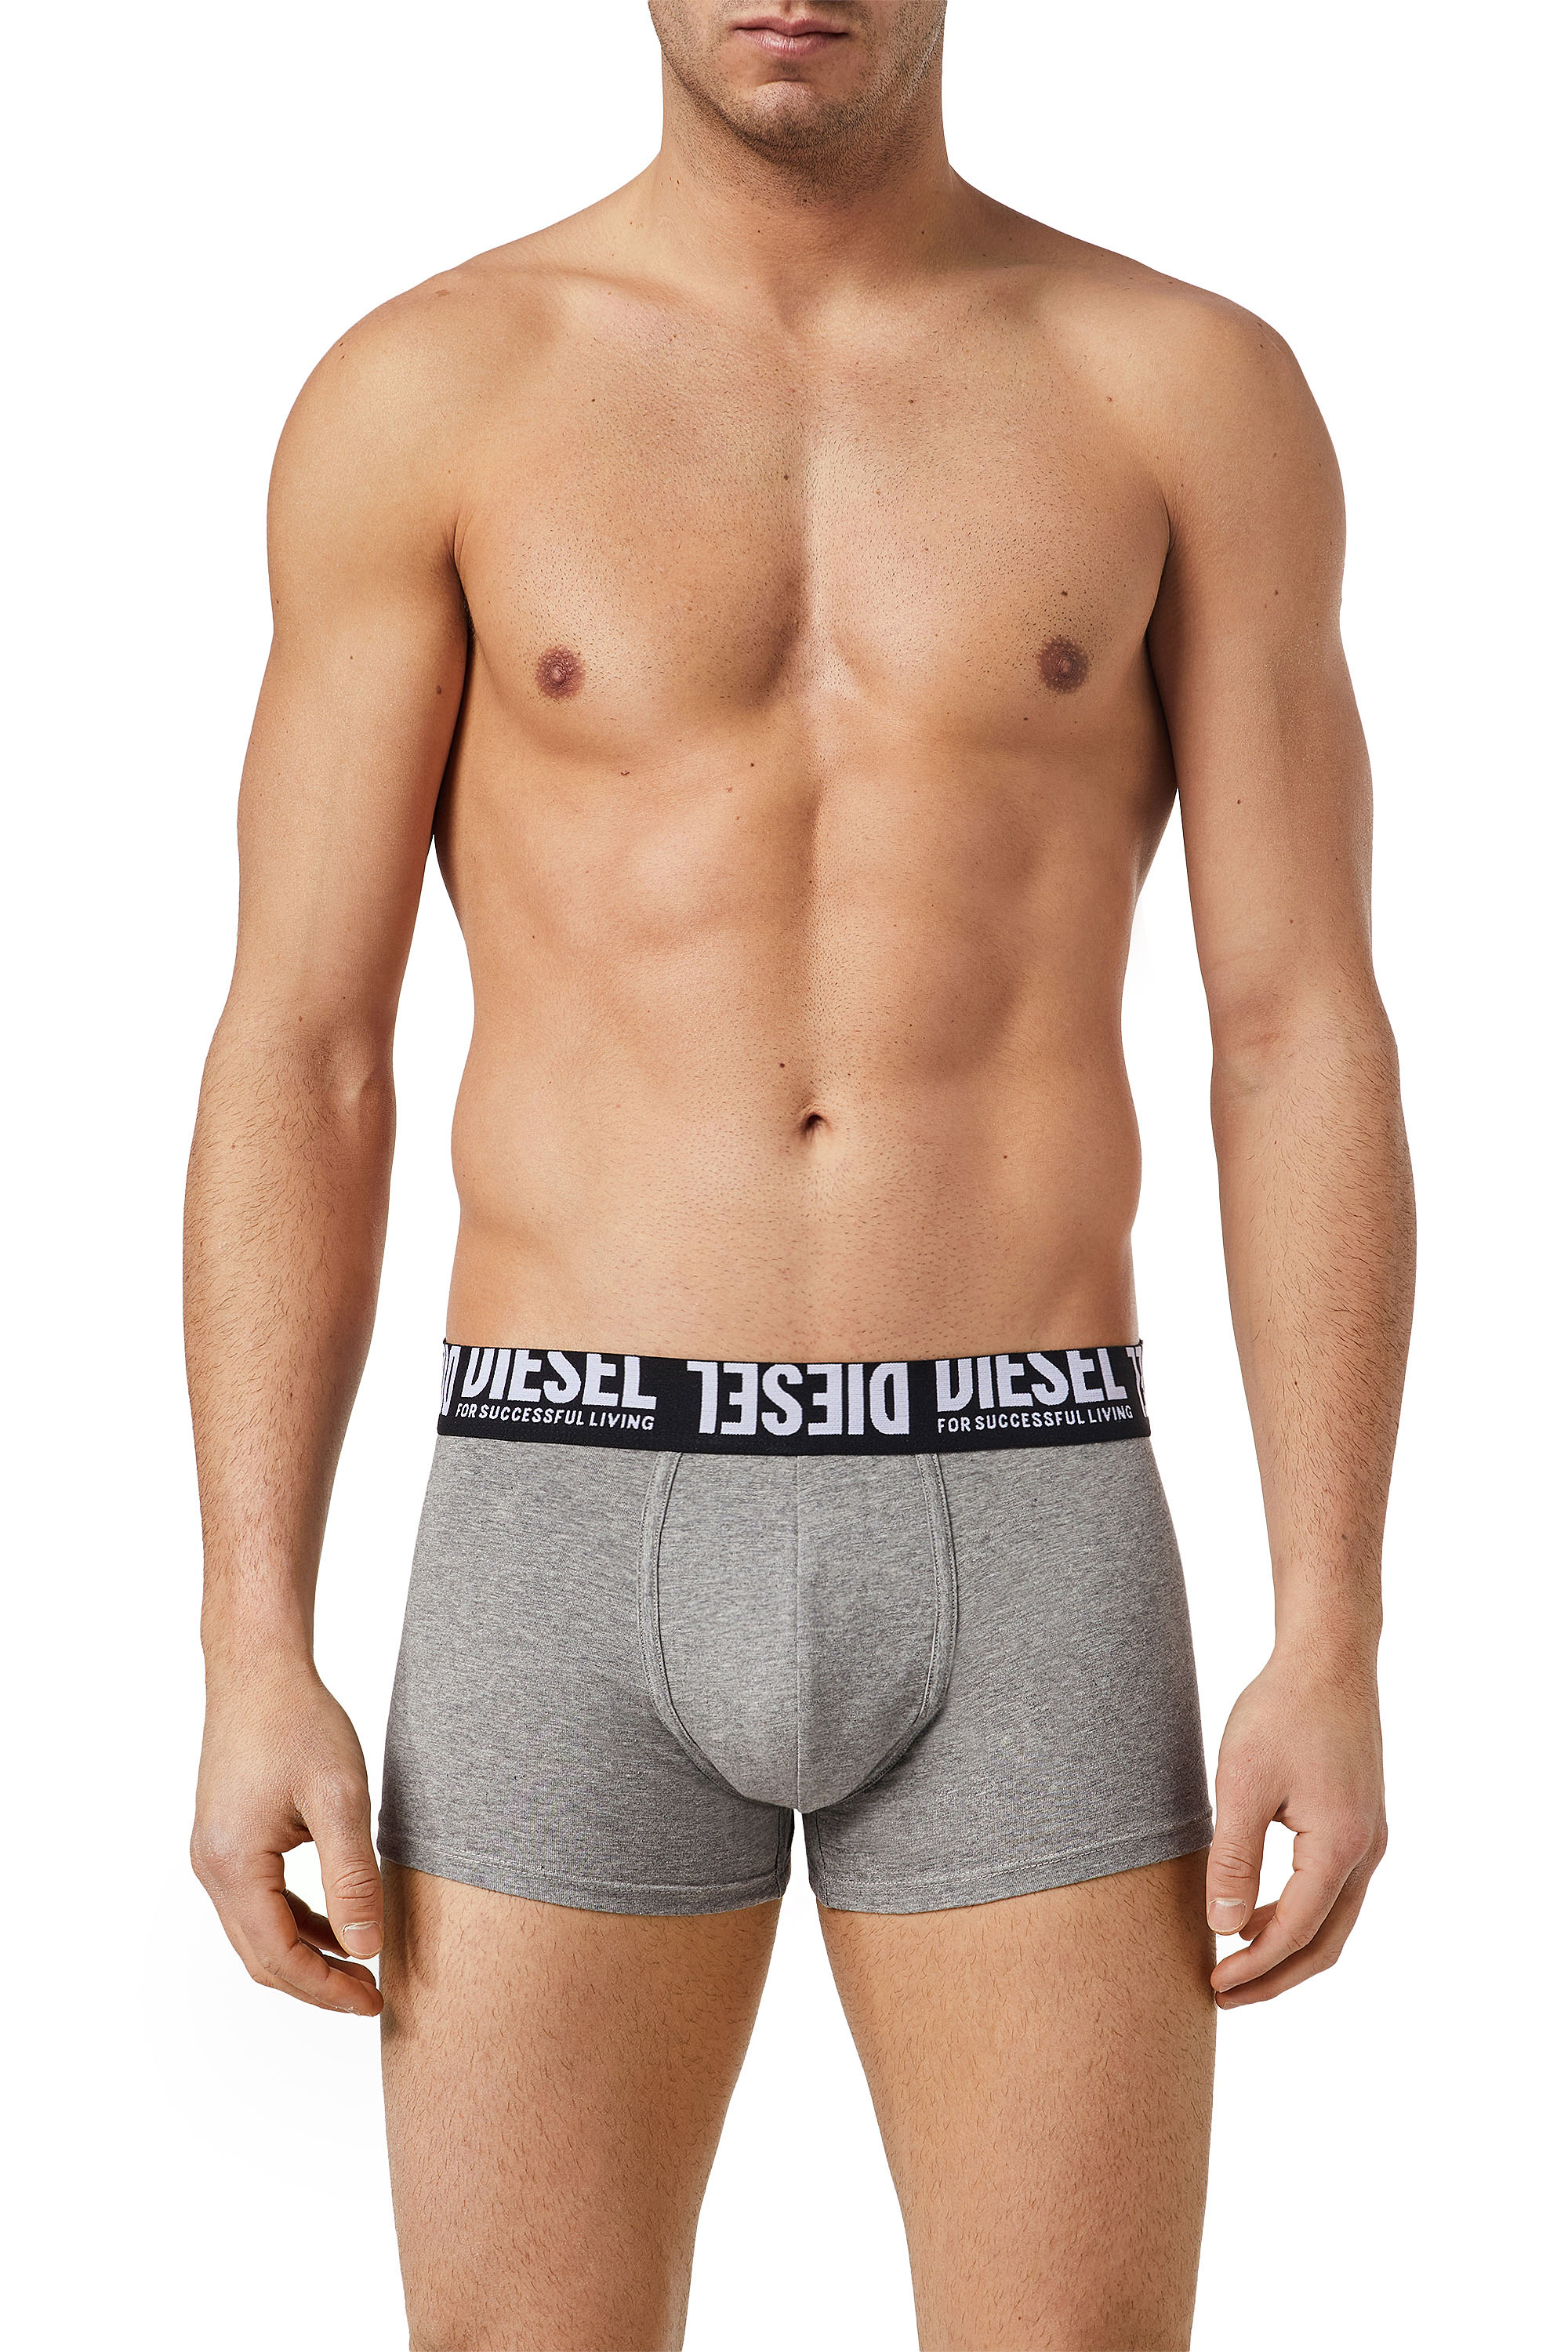 DIESEL Cotton Two-pack Of Briefs With Contrast Binding for Men Mens Clothing Underwear Boxers briefs 